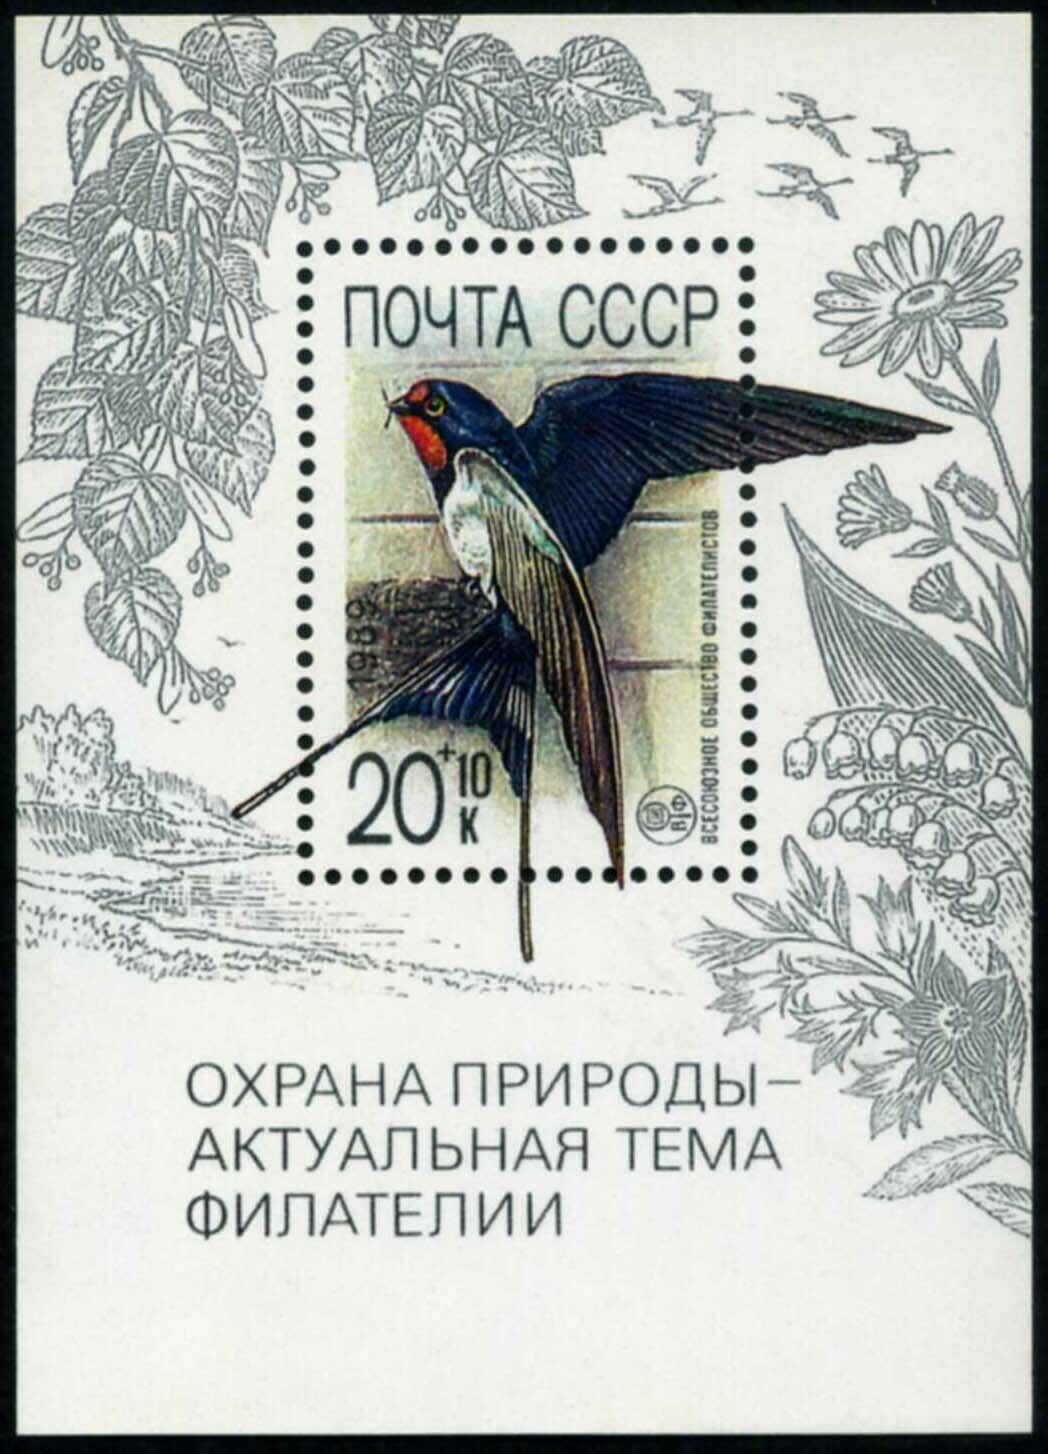 USSR-Russia-1989 Protection of Nature. Birds. Swallow